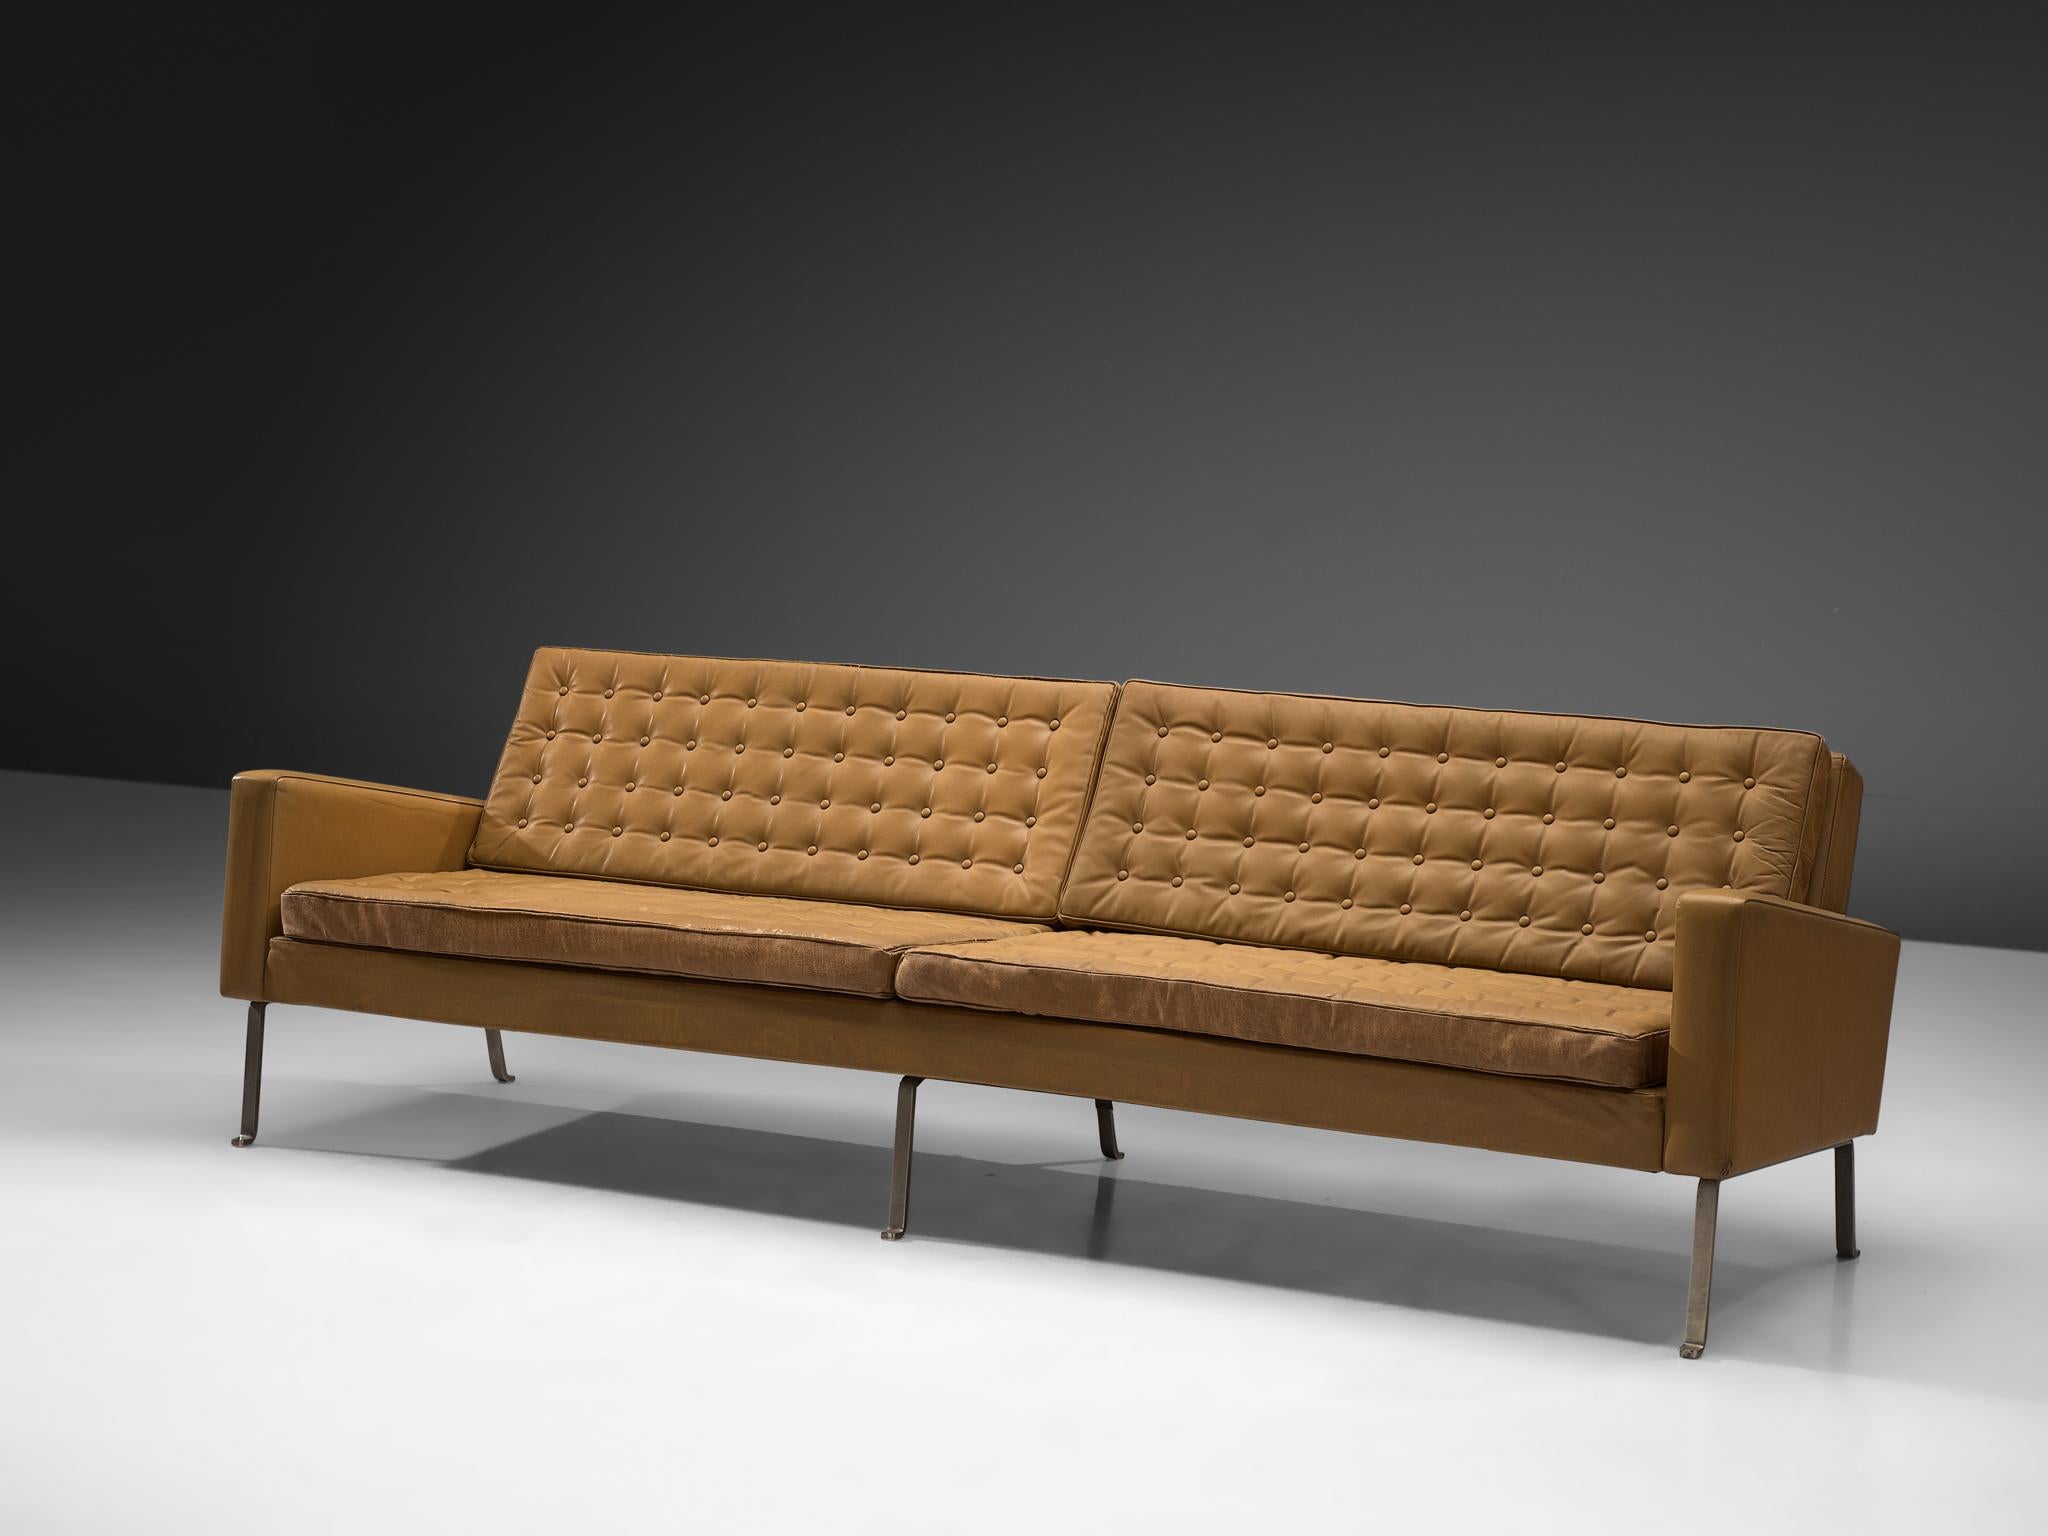 Roland Rainer for Wilkhahn, sofa, leather, metal, Germany, 1960s

Modern four-seat sofa by Roland Rainer. This large sofa features an extraordinary stately design, being both crisp and warm at the same time. The metal frame holds a camel brown